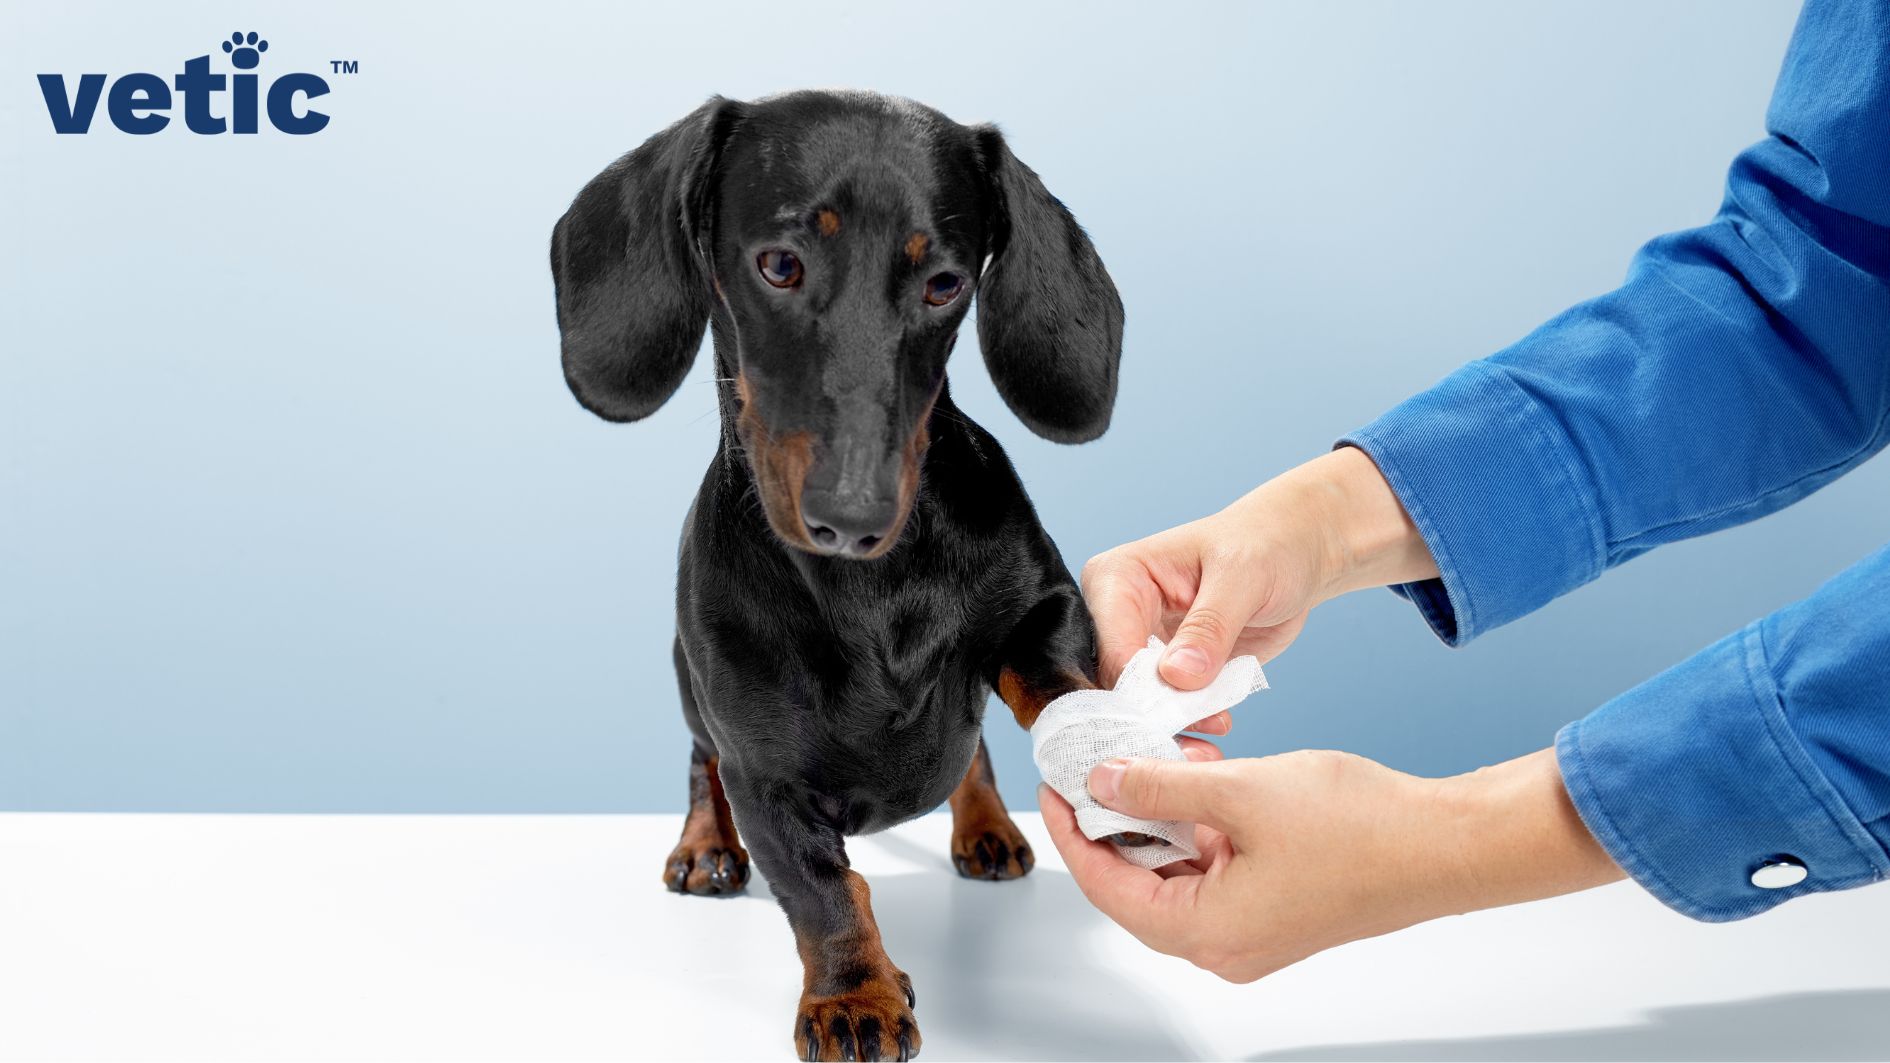 Small Dachshund puppy standing on a clean white surface. Two hands visible with one hand lifting the pup's left front paw and bandaging it. Excessive bleeding is an emergency in pets that demands bandaging and basic first aid kits.